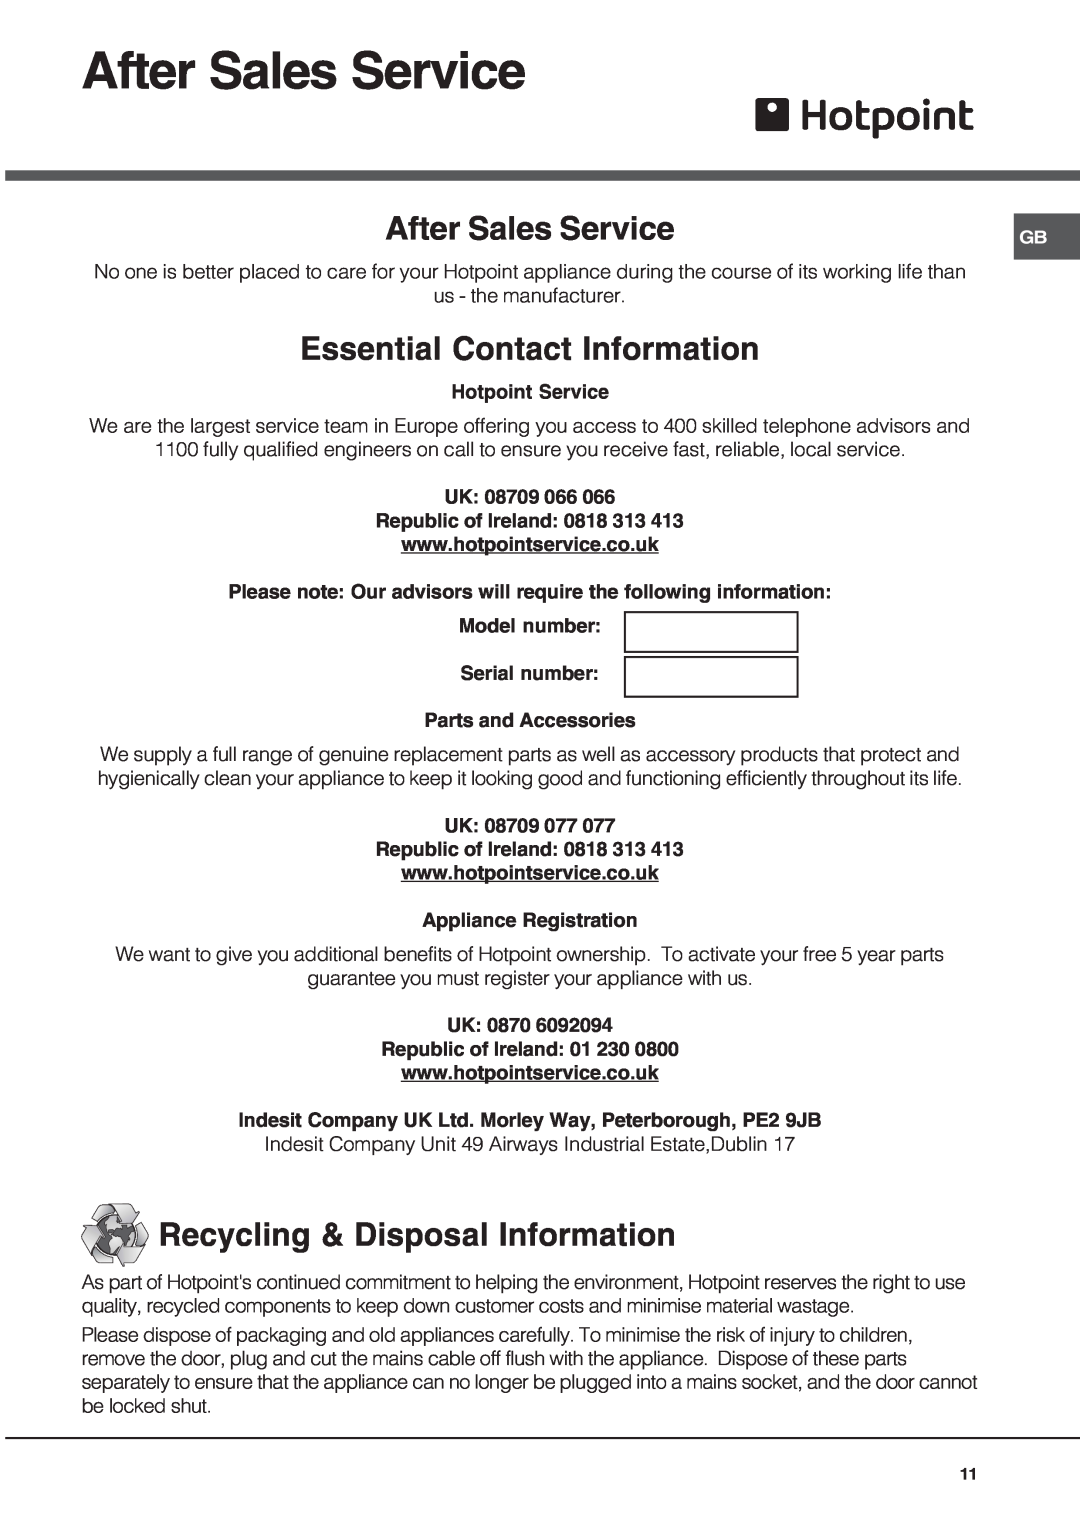 Hotpoint SN56EX operating instructions After Sales Service, Essential Contact Information, Recycling & Disposal Information 